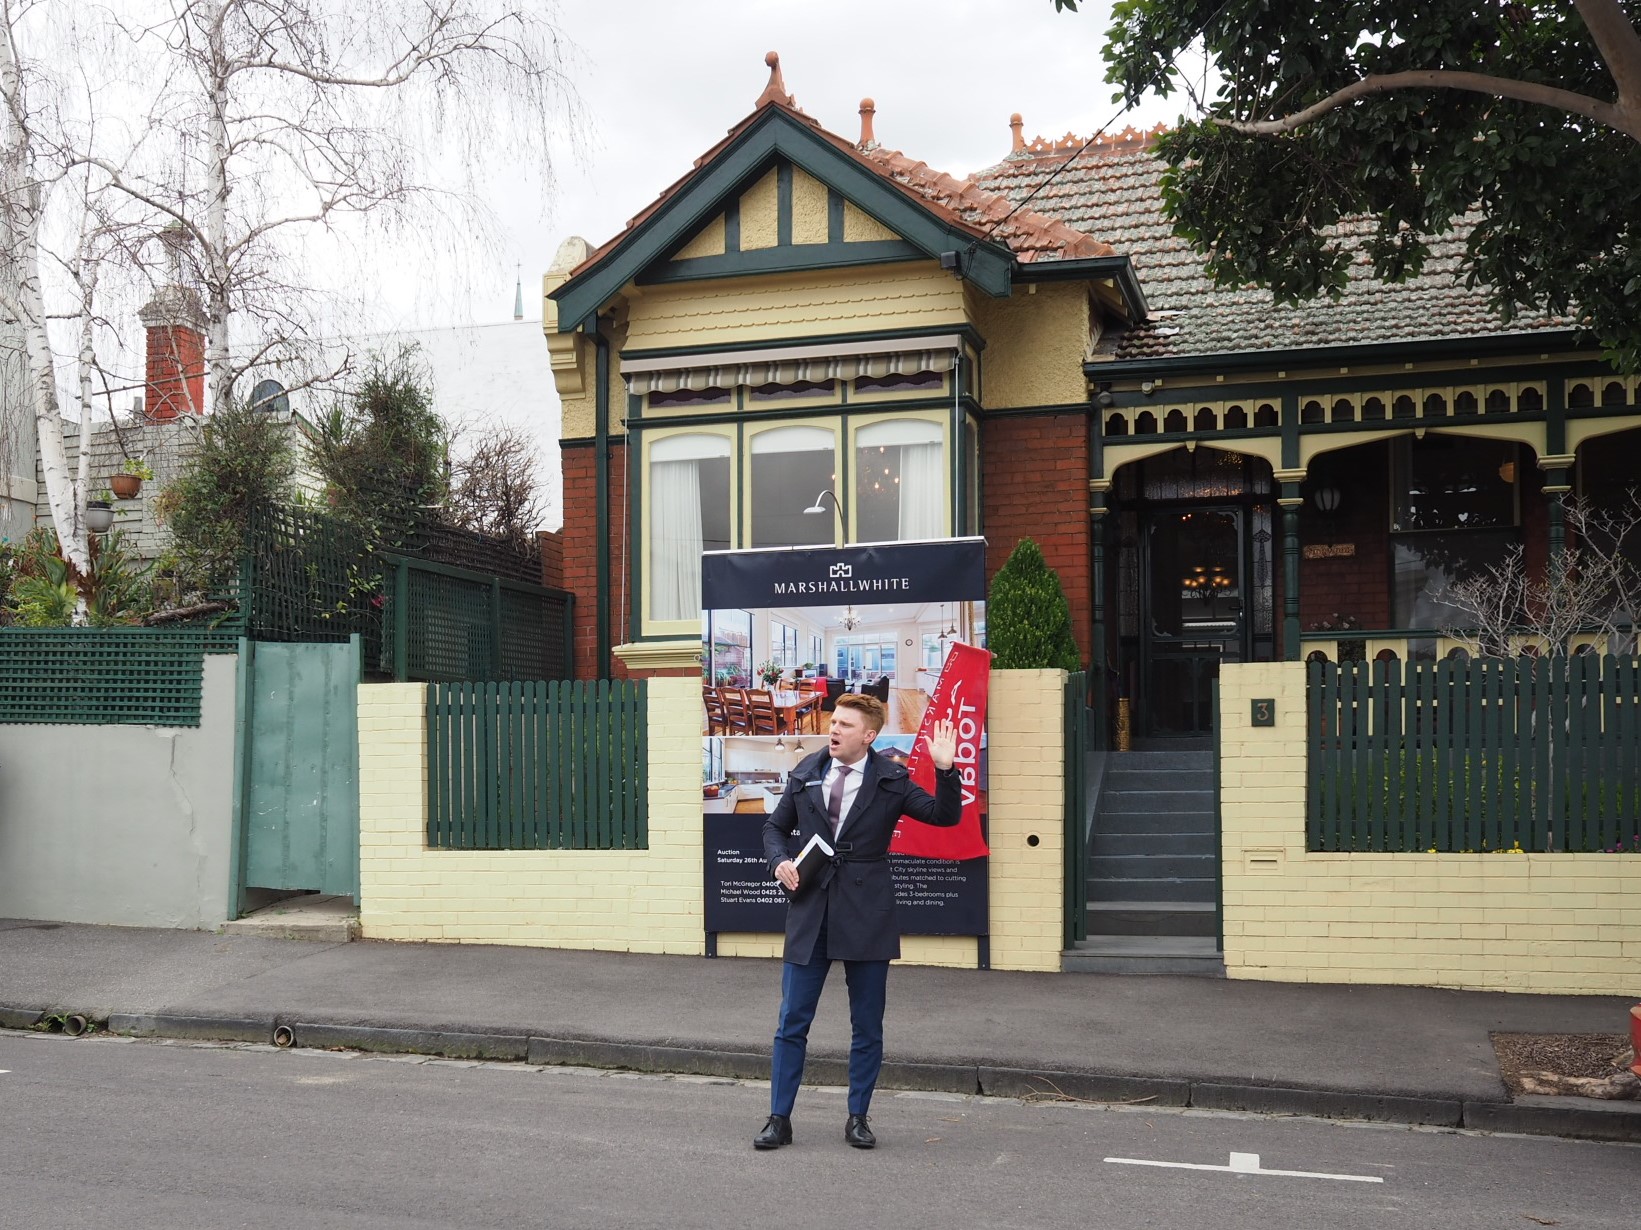 Auction snapshot - Auctioneer standing in front of yellow and red brick house